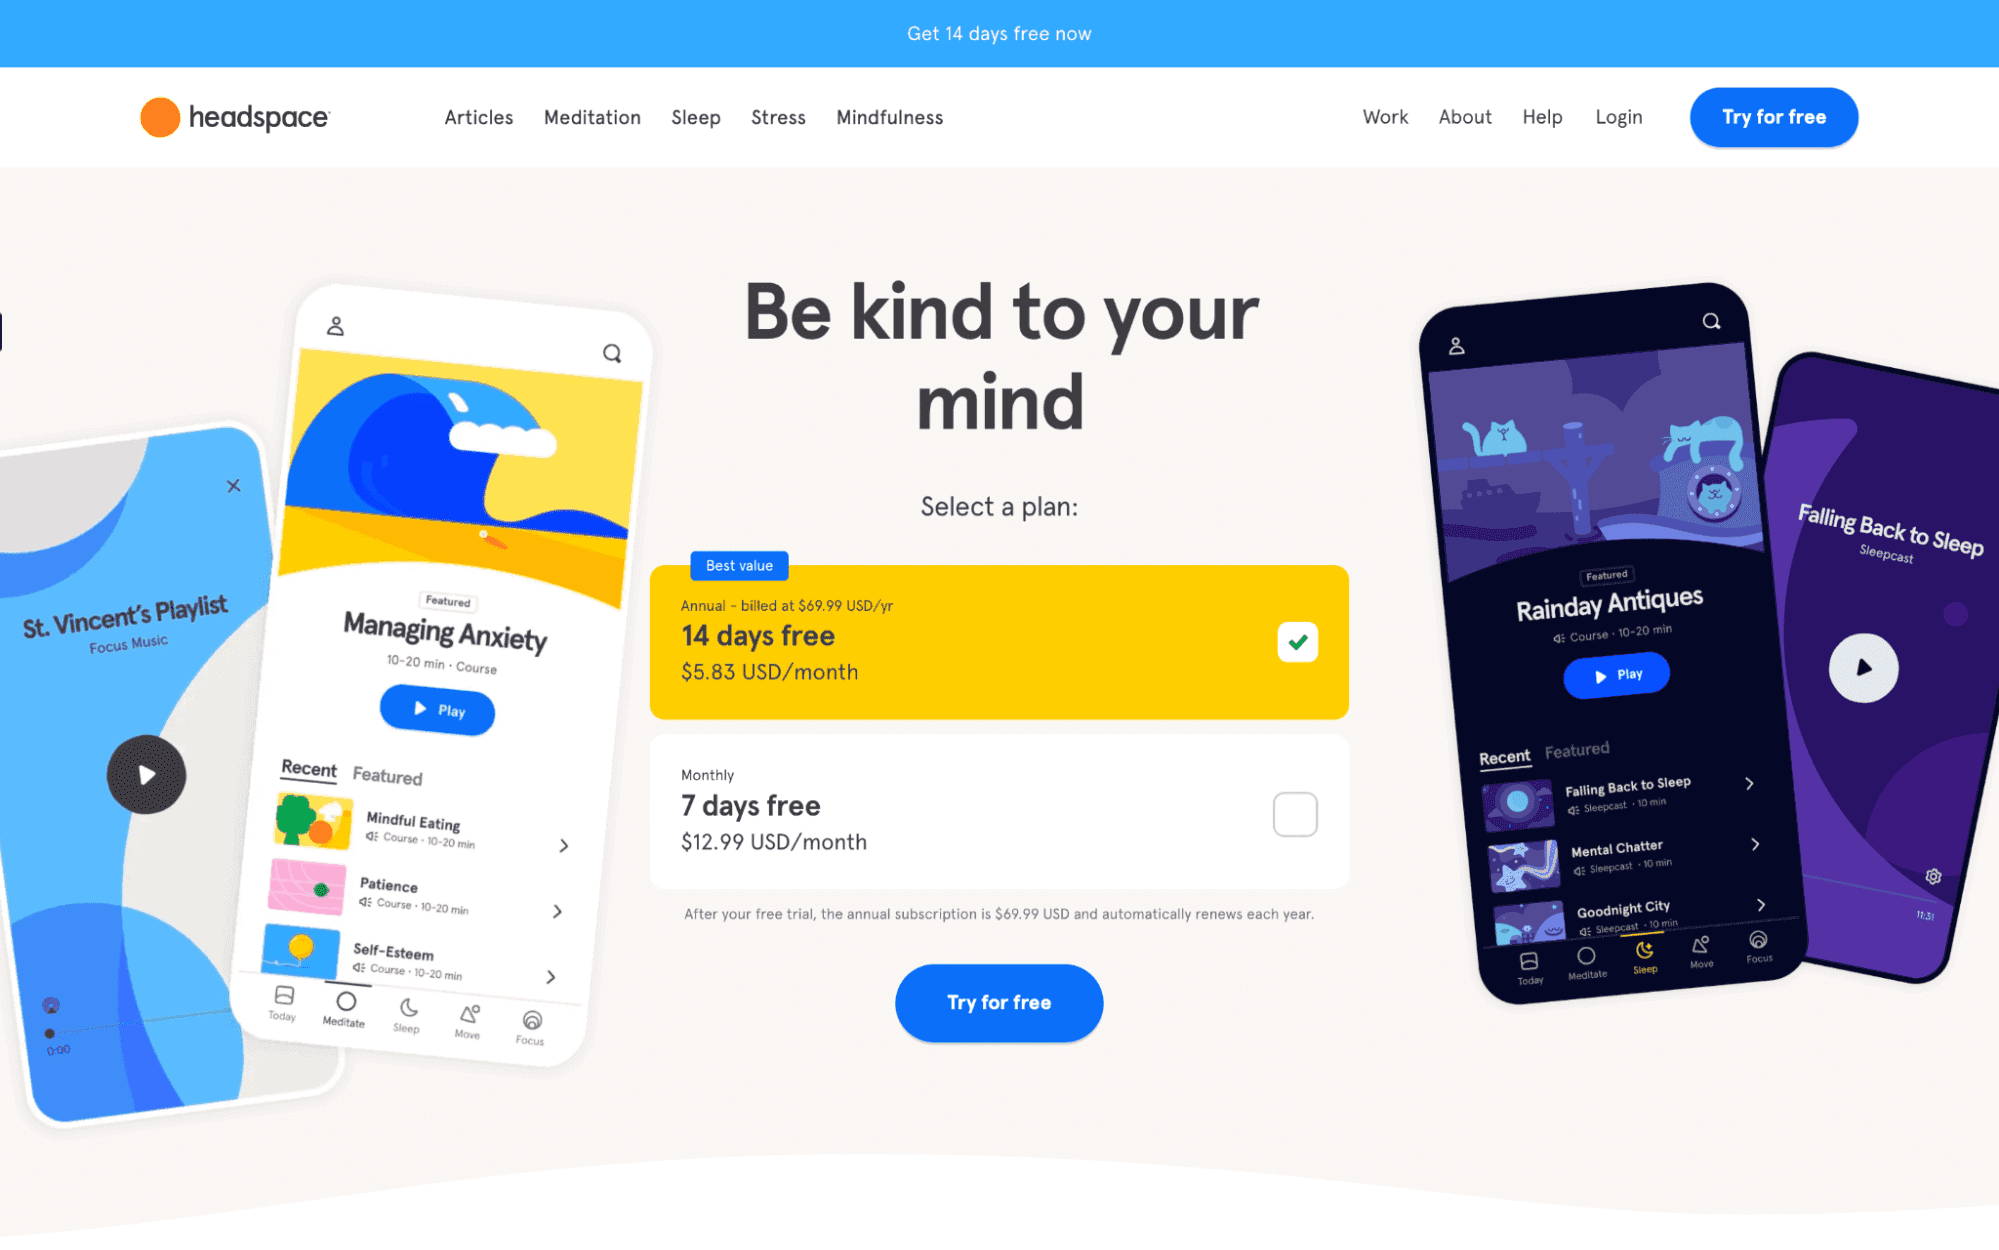 homepage of headspace's website. "Be kind to your mind, select a plan:" and lists some of their plans. They use bright colors and illustrations to imprint their brand identity.